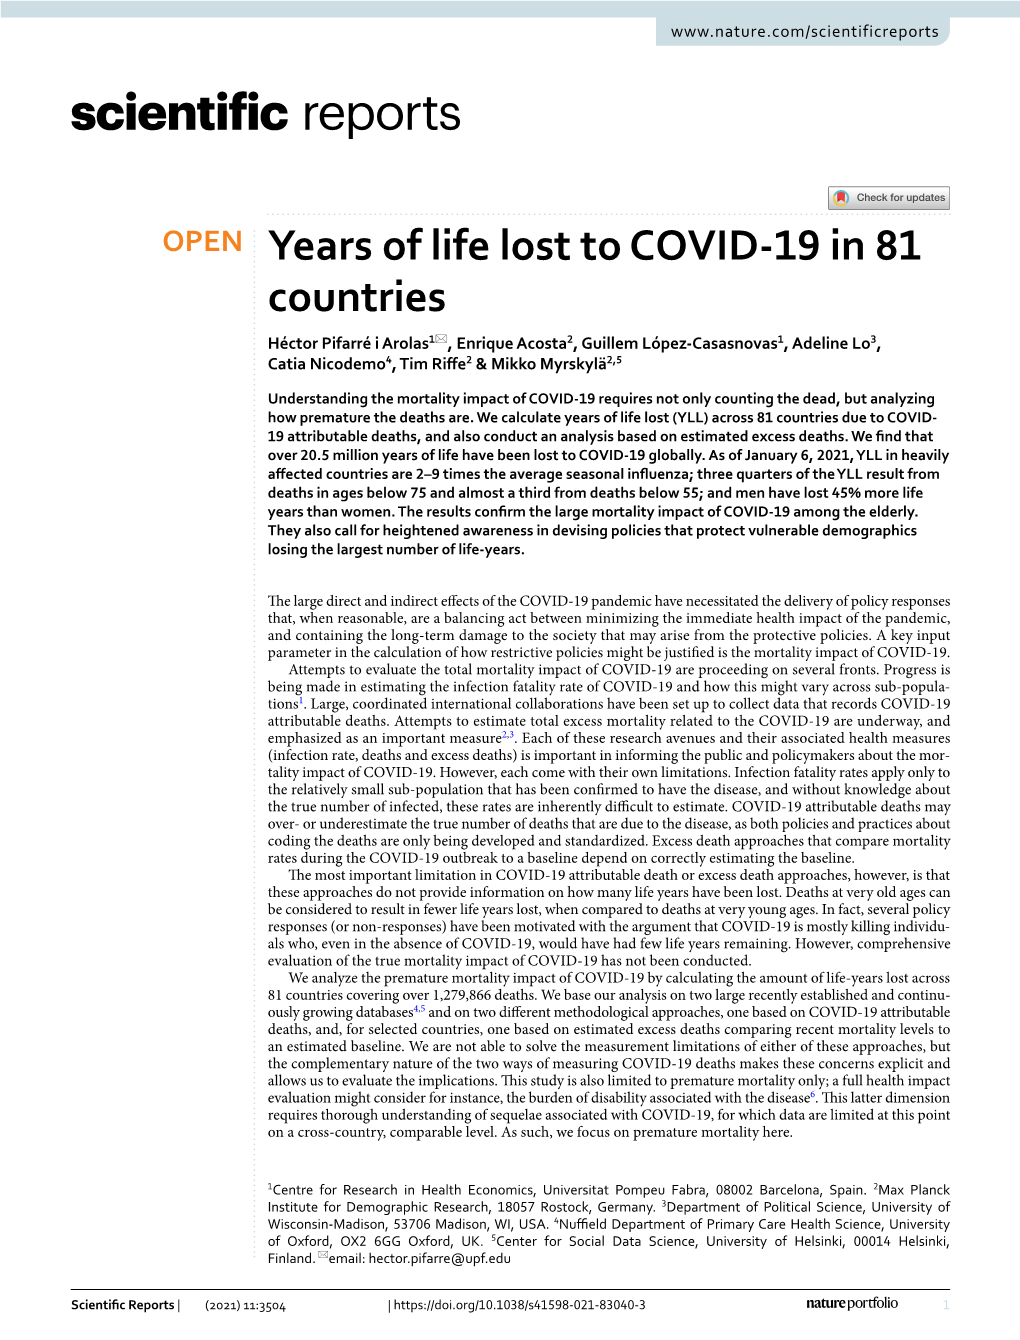 Years of Life Lost to COVID-19 in 81 Countries